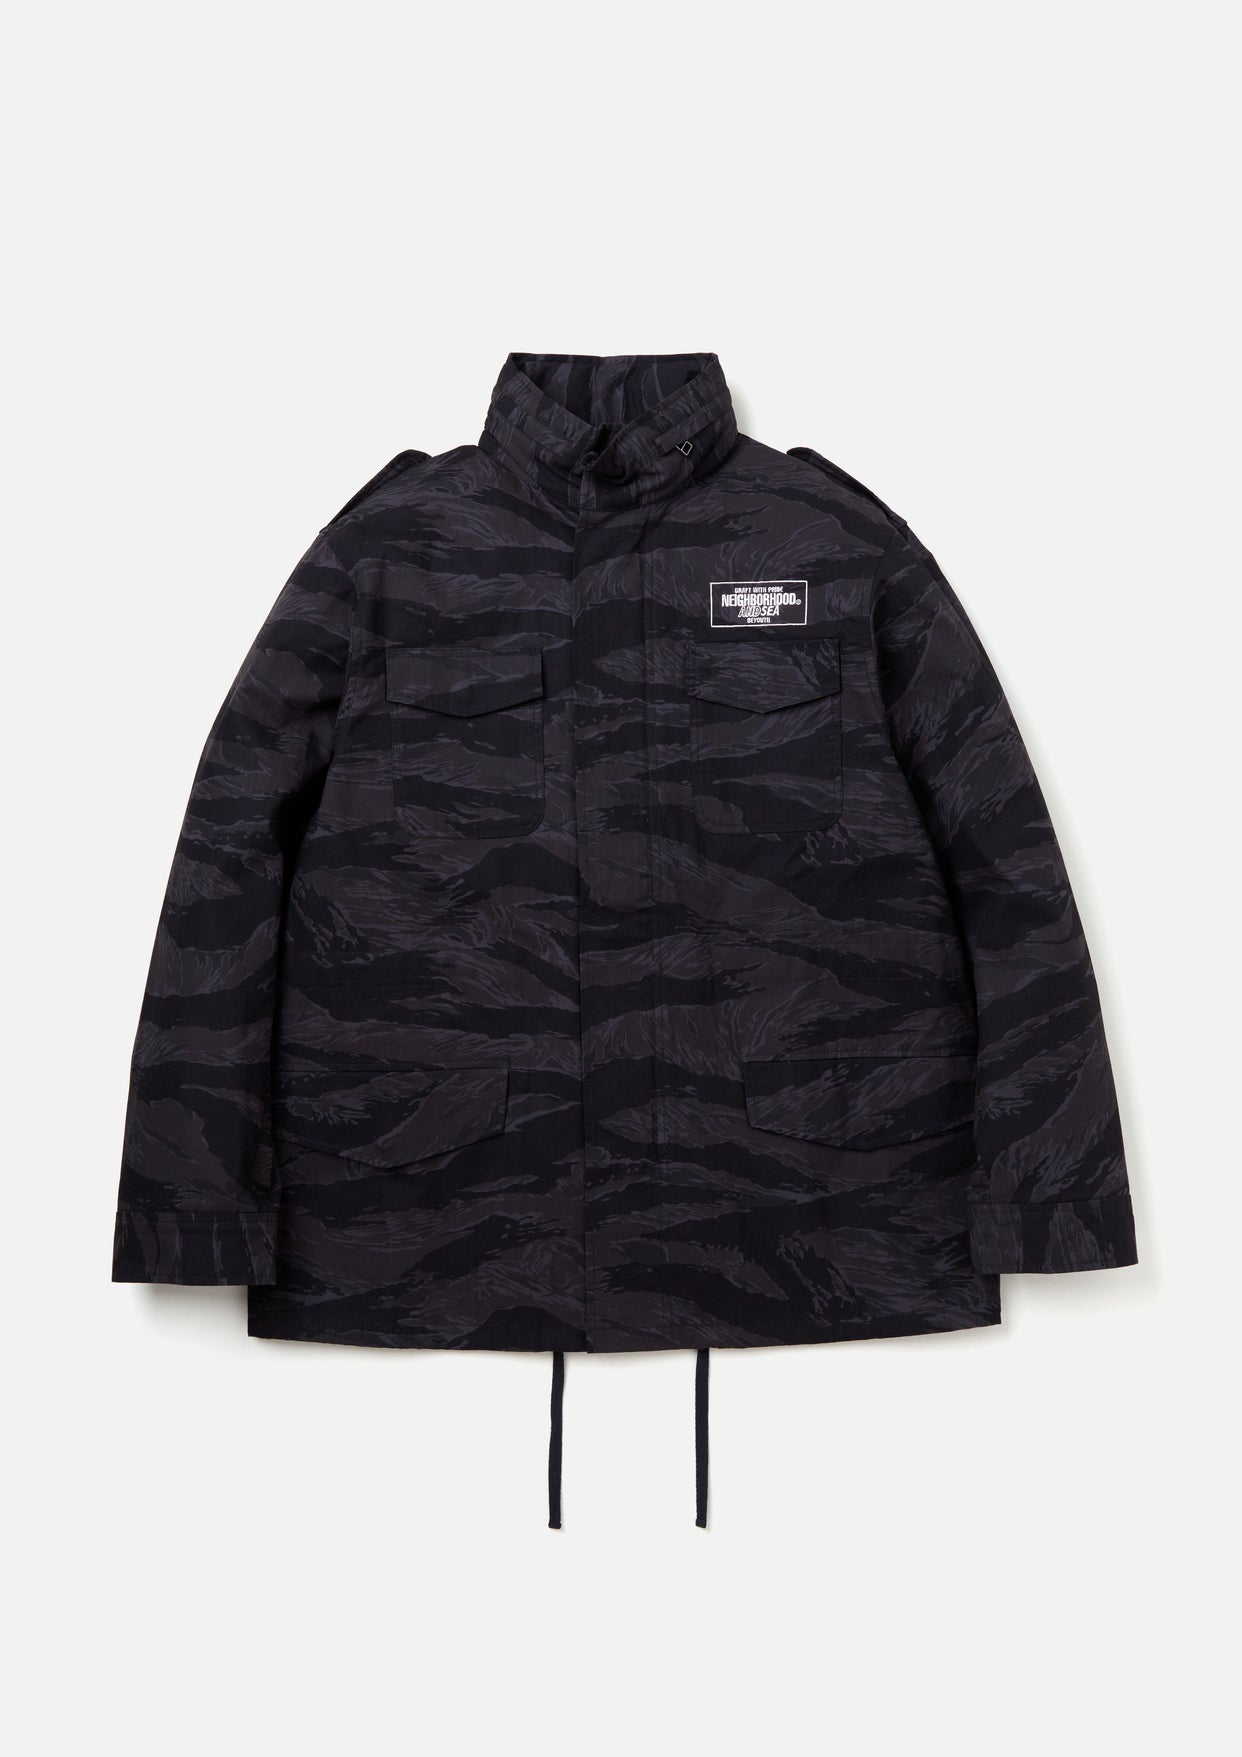 NH X WIND AND SEA . CAMOUFLAGE M-65 JACKET